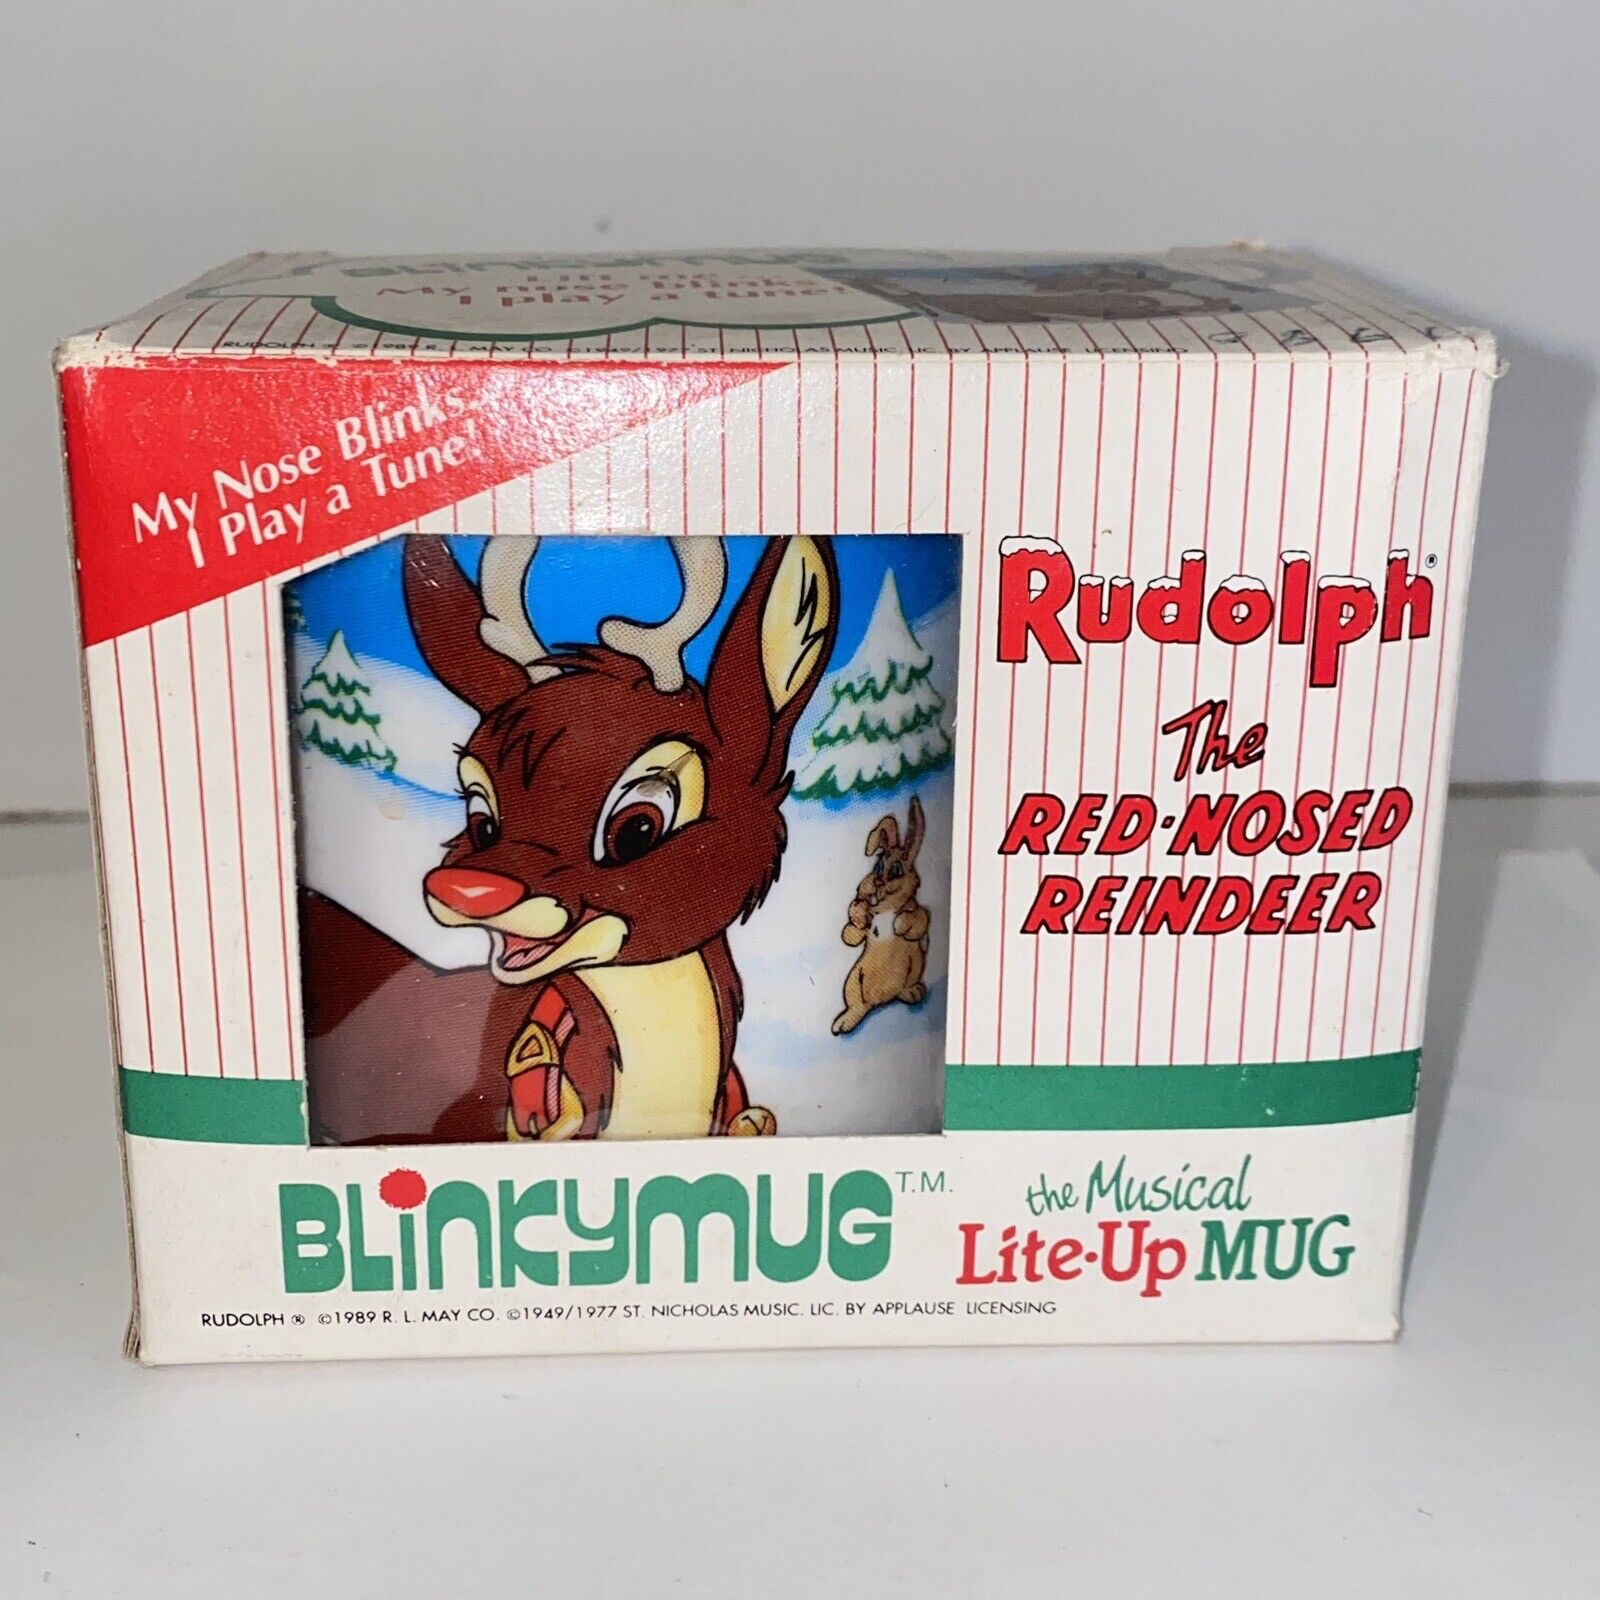 Vintage 1989 Rudolph the Red Nose Reindeer Acrylic Mug by R L May Co